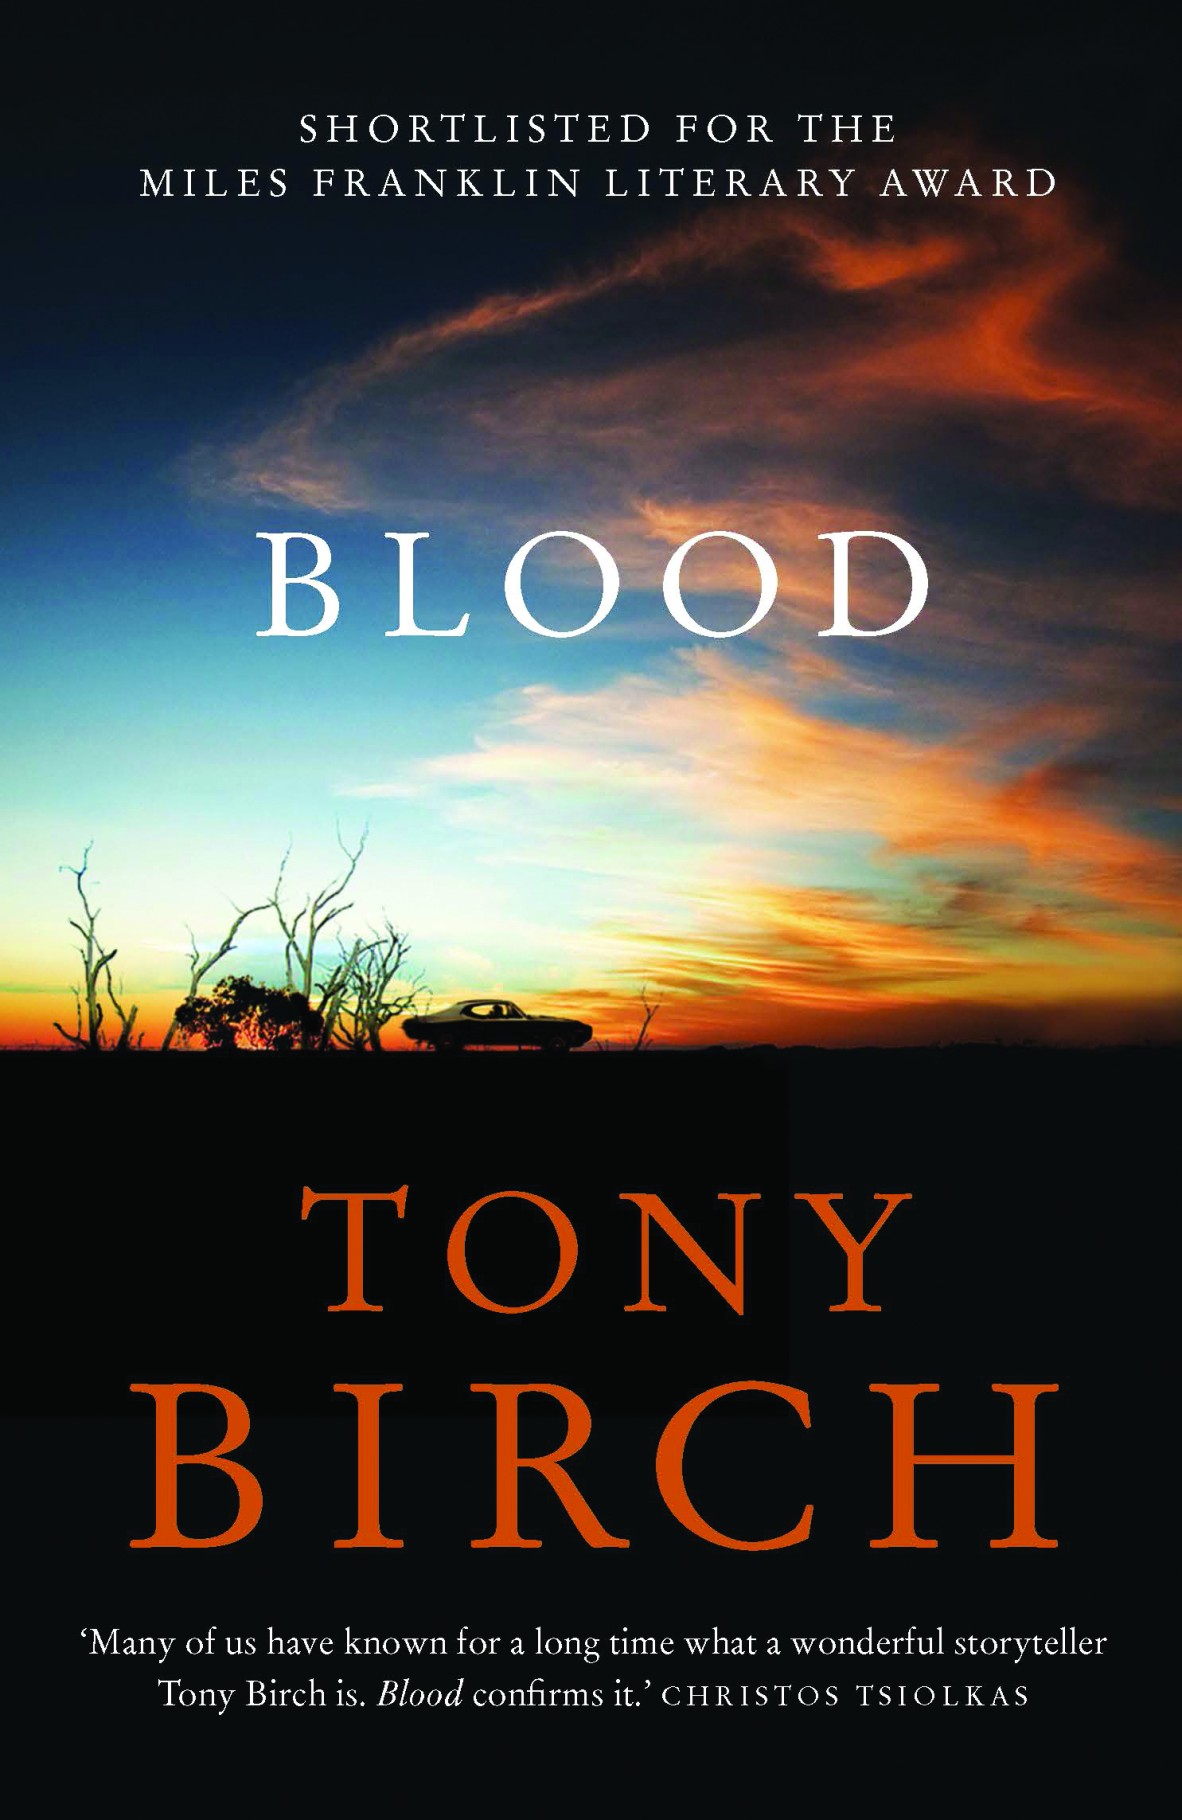 A book cover showing a silhouette of a car and a few dead trees against a sunset The text reads shortlisted for the Miles Franklin Literary award Blood Tony Birch Many of us have known for a long time what a wonderful storyteller Tony Birch is Blood confirms it Christos Tsiolkas